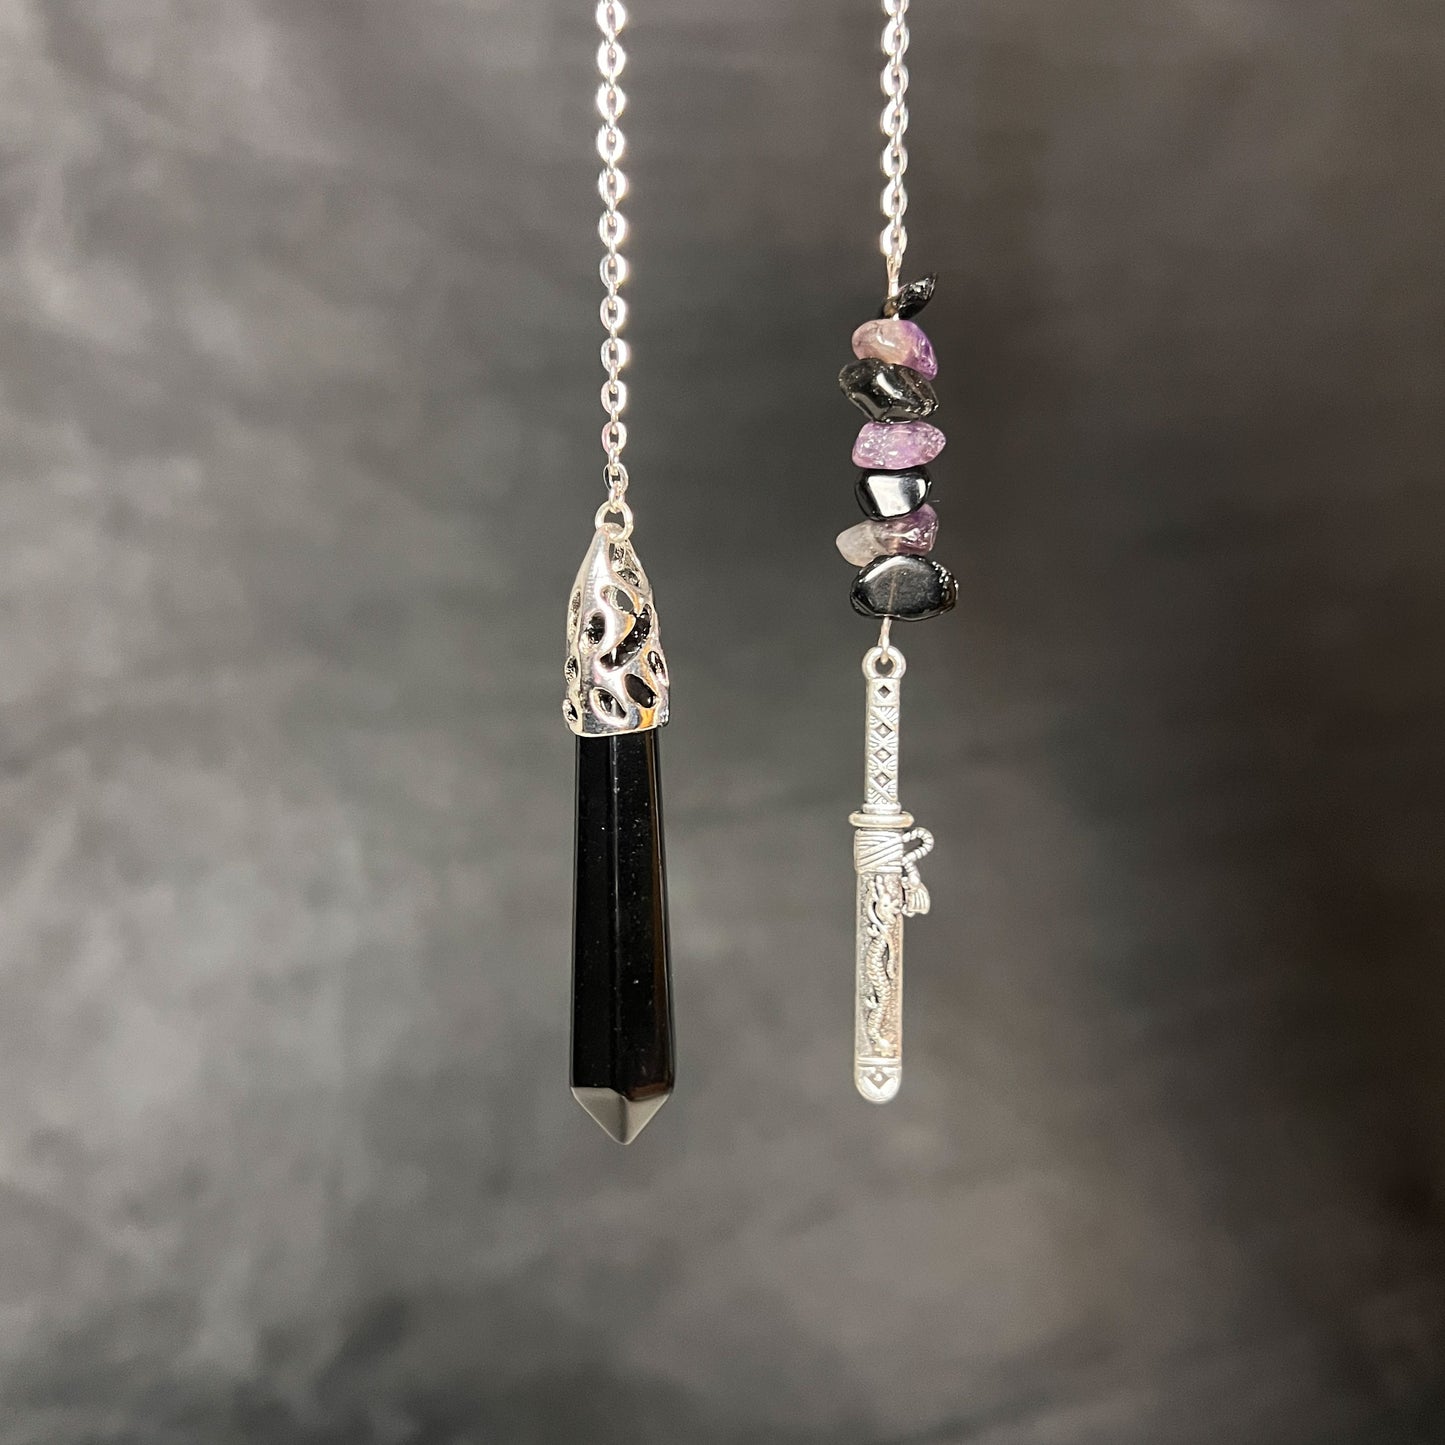 Crystal pendulum onyx obsidian amethyst gemstones with a tanto dagger dowsing tool fortune teller gift gothic divination tool